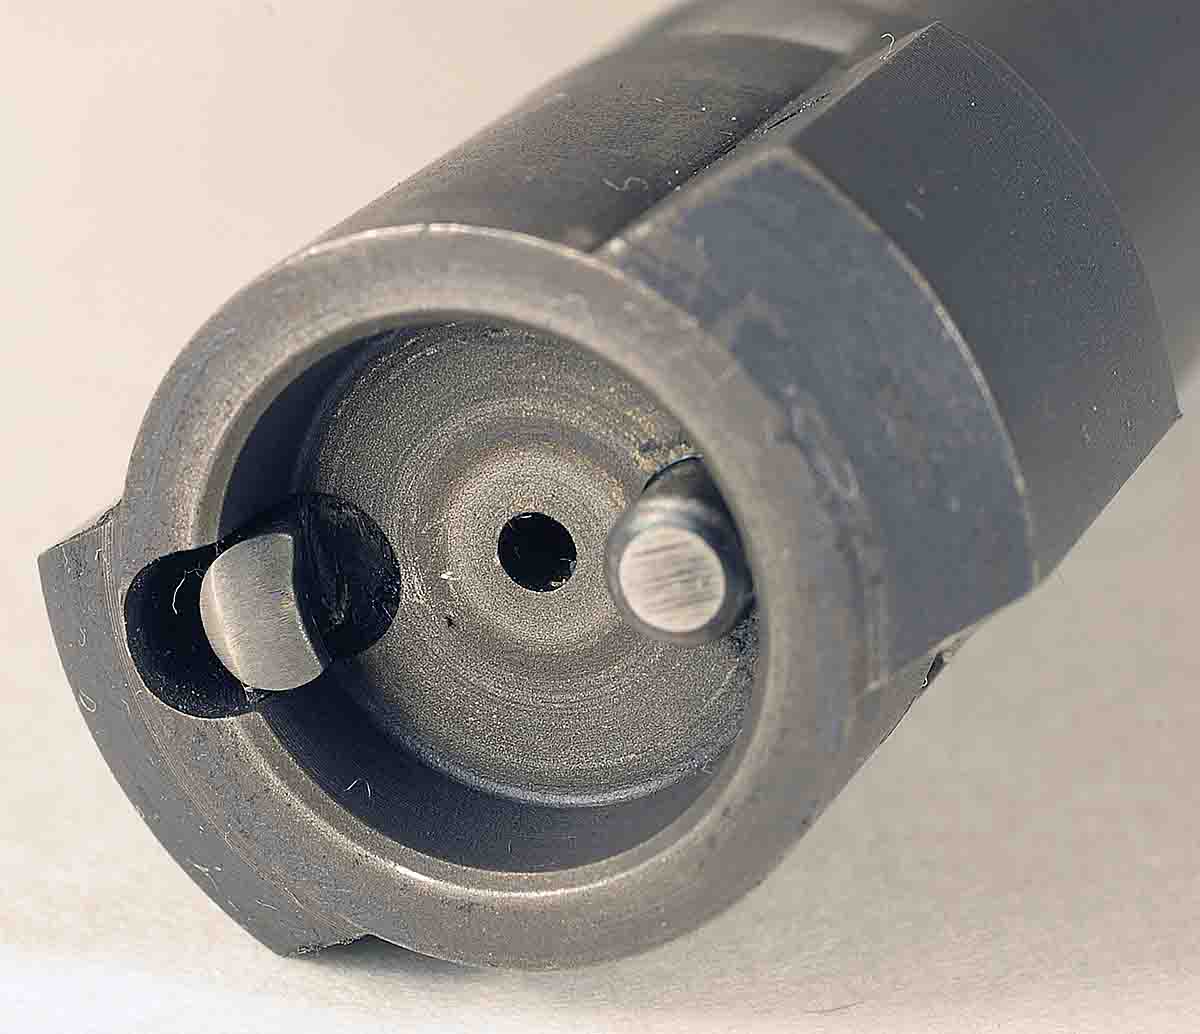 The Pro-Series 2000 receiver features a recessed bolt face with a solid rim. The extractor is the hook (left side) on the bolt face. The plunger ejector is on the opposite side.